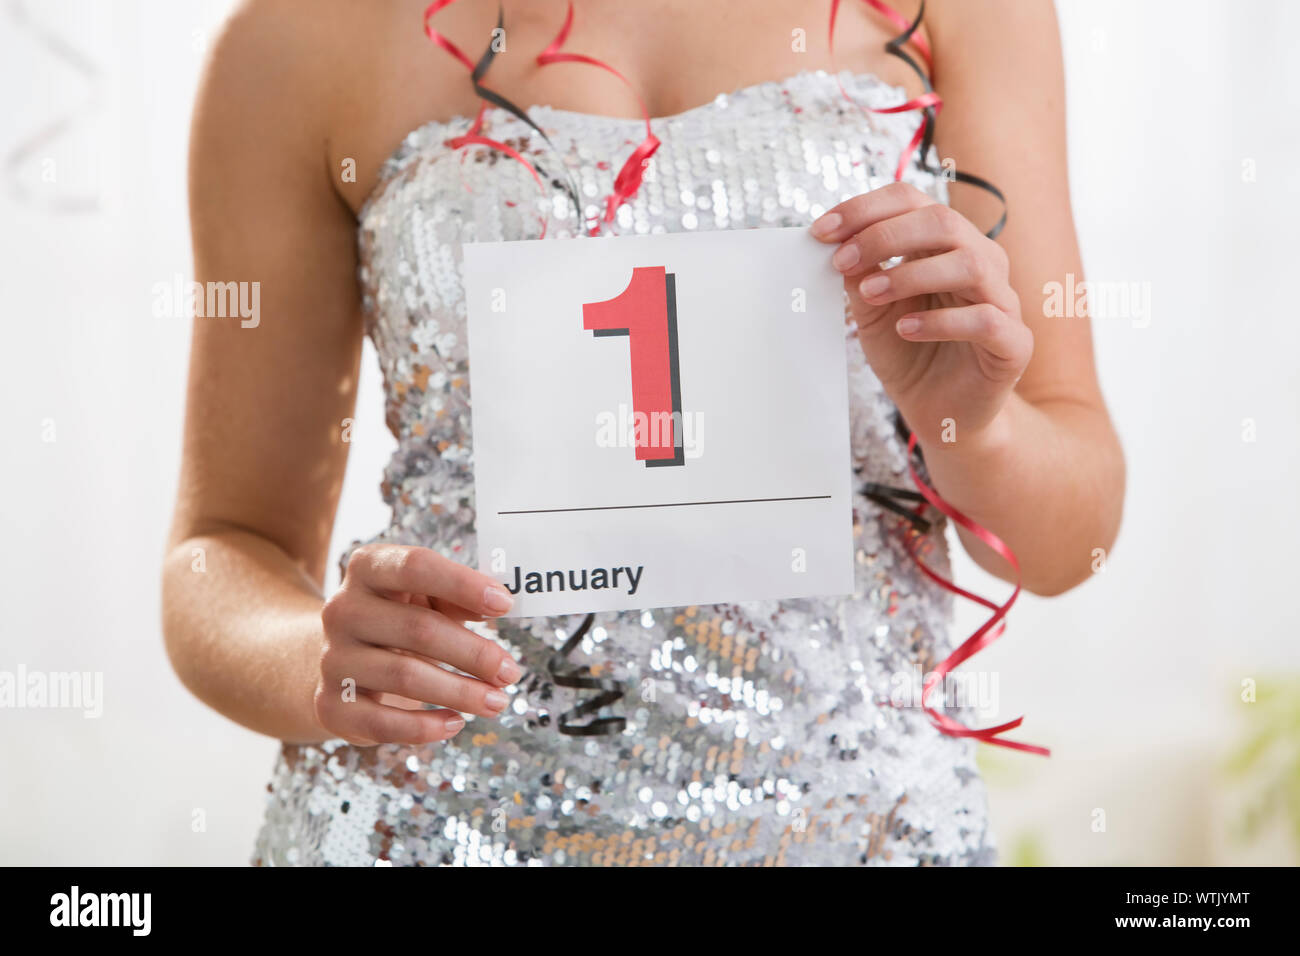 Teenage girl (16-17) in sequin dress holding calendar showing New Year's Day Stock Photo